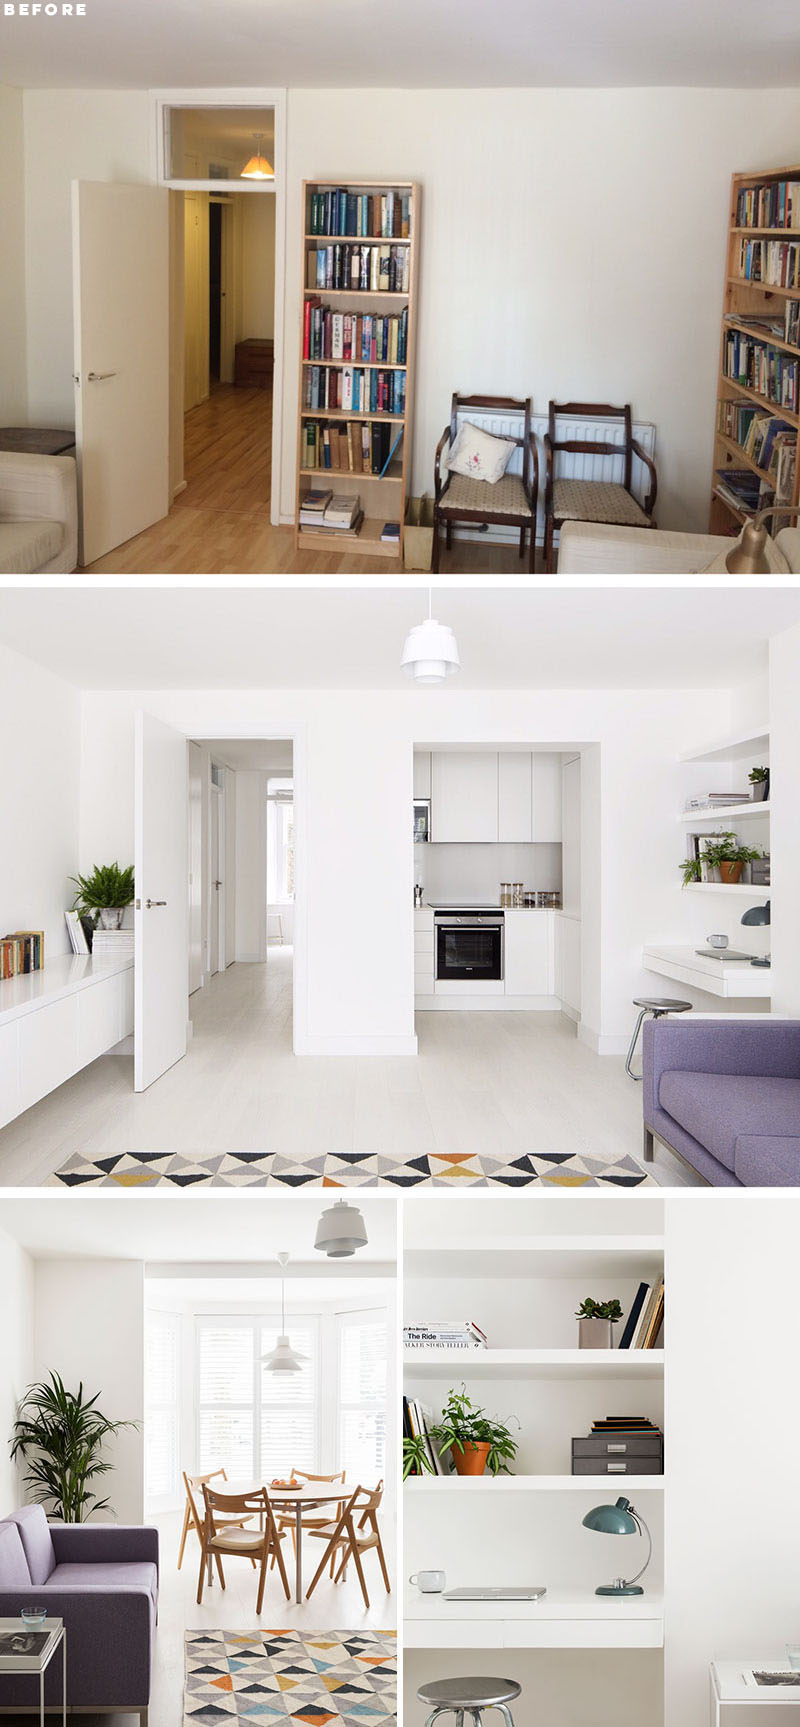 Before And After - This Small Apartment In London Was Redesigned To ...